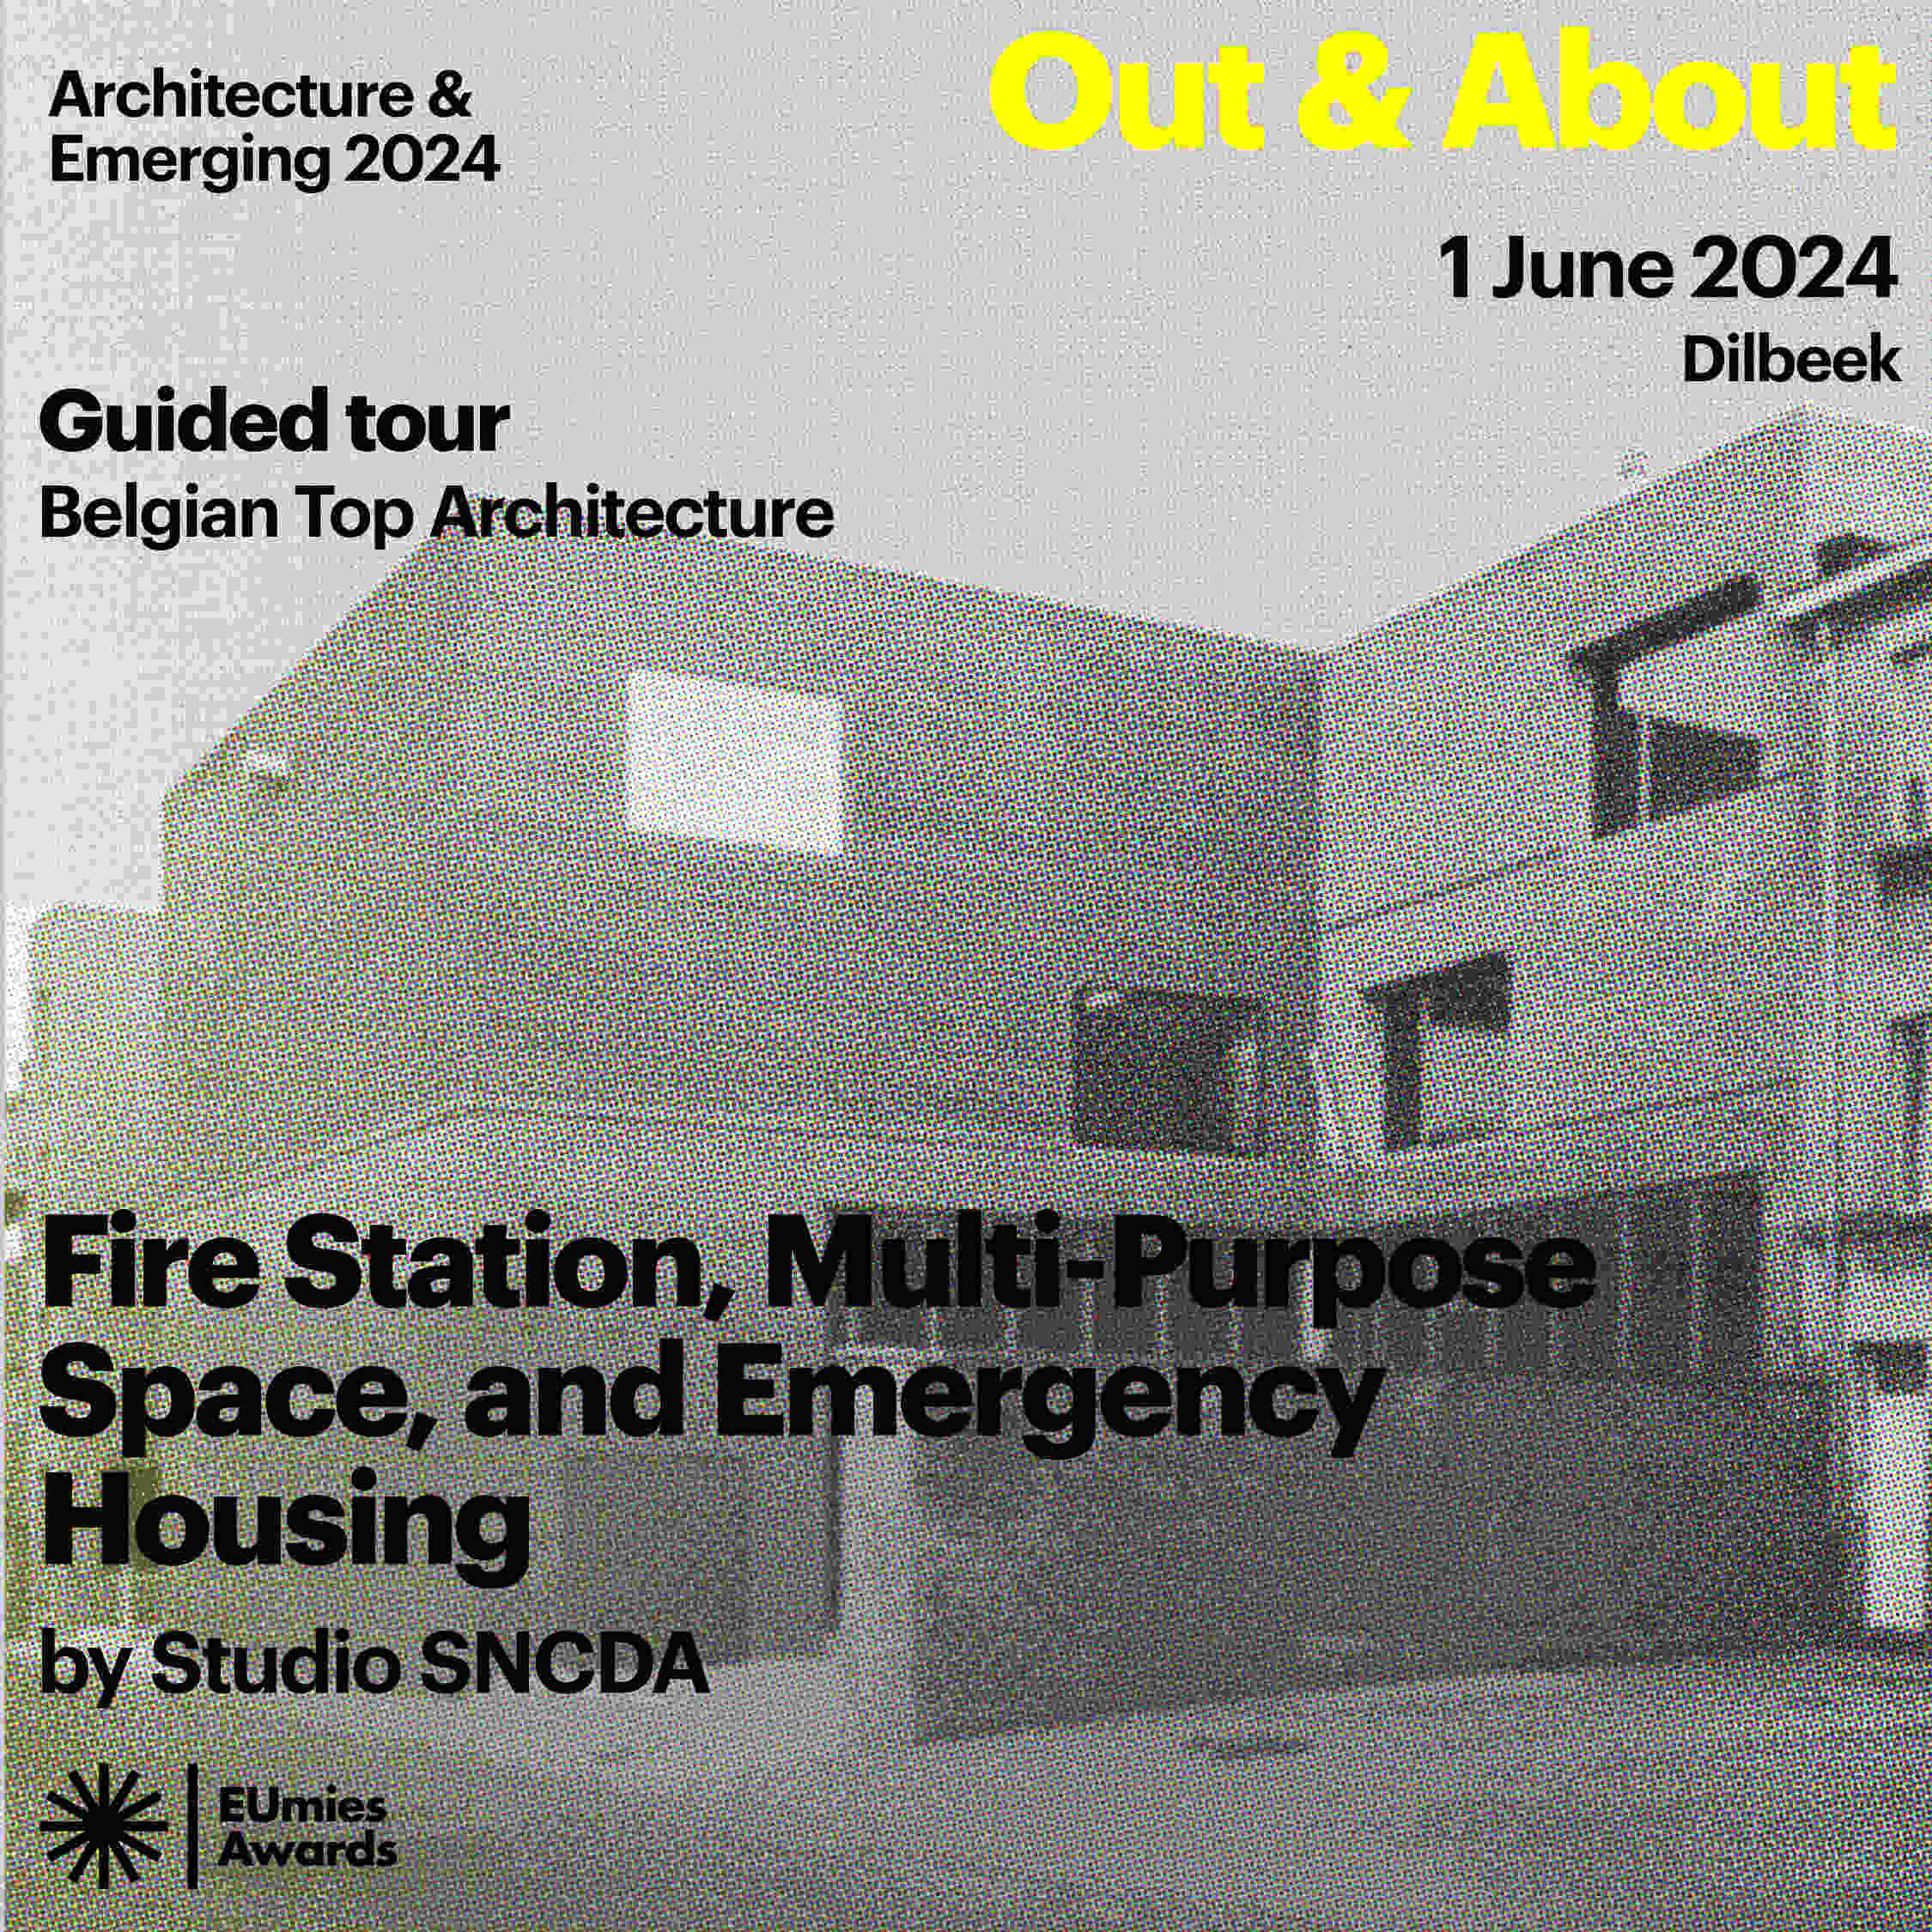 Out & About: Fire Station, Multi-Purpose Space, and Emergency Housing